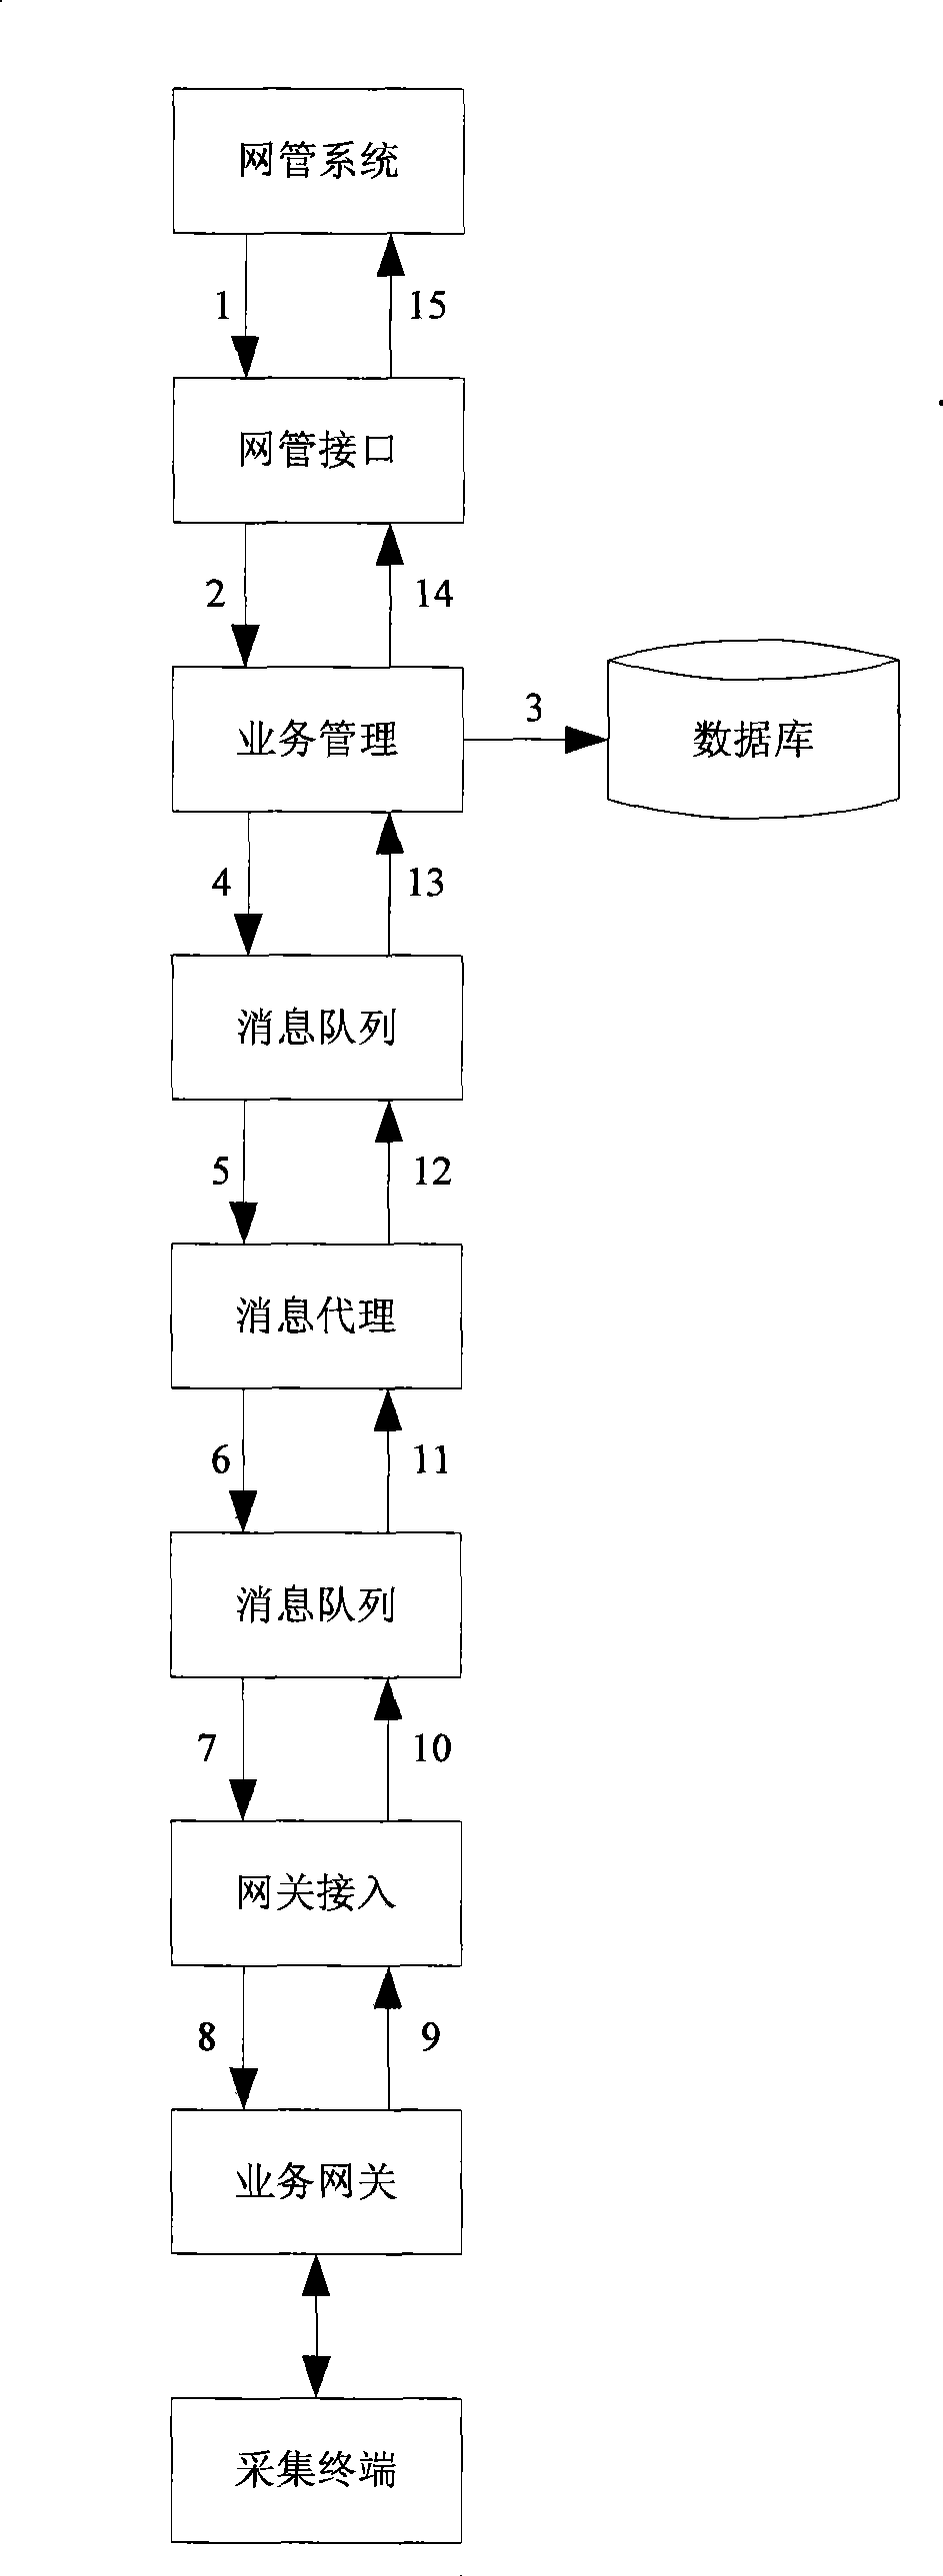 Data processing apparatus and method applied on data collection platform